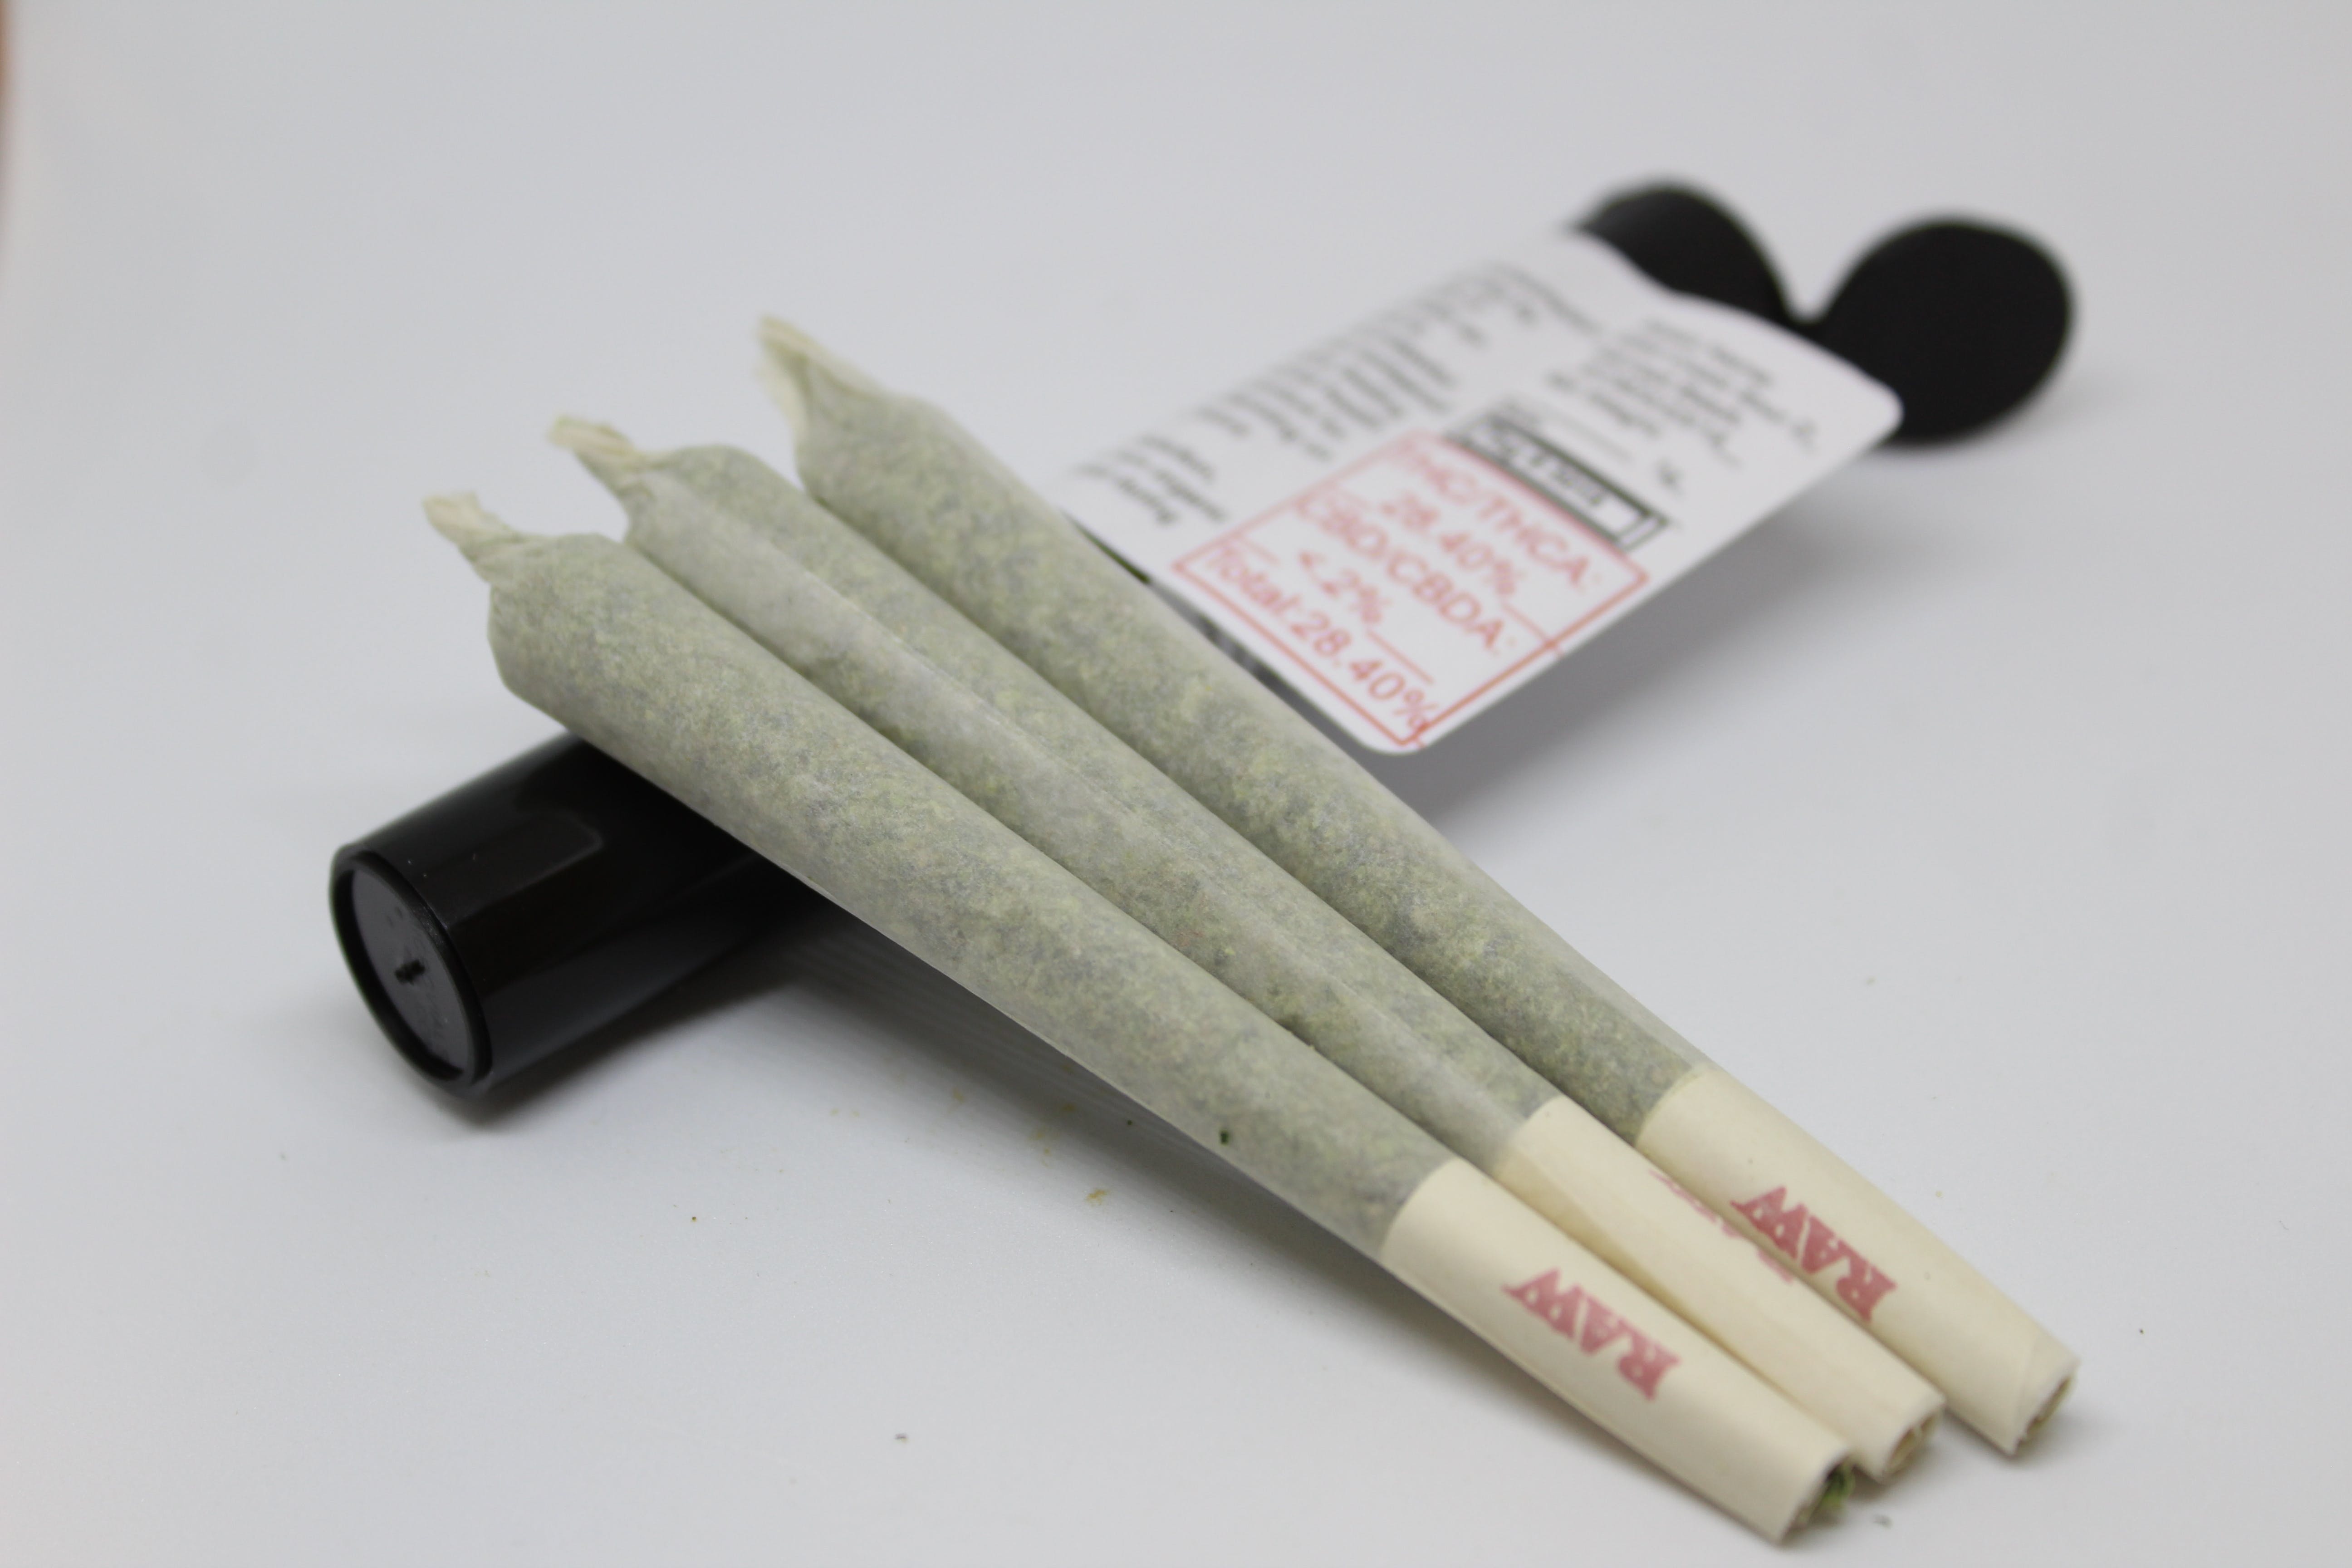 preroll-three-full-gram-1g-joints-for-2425-21-21-21-tax-included